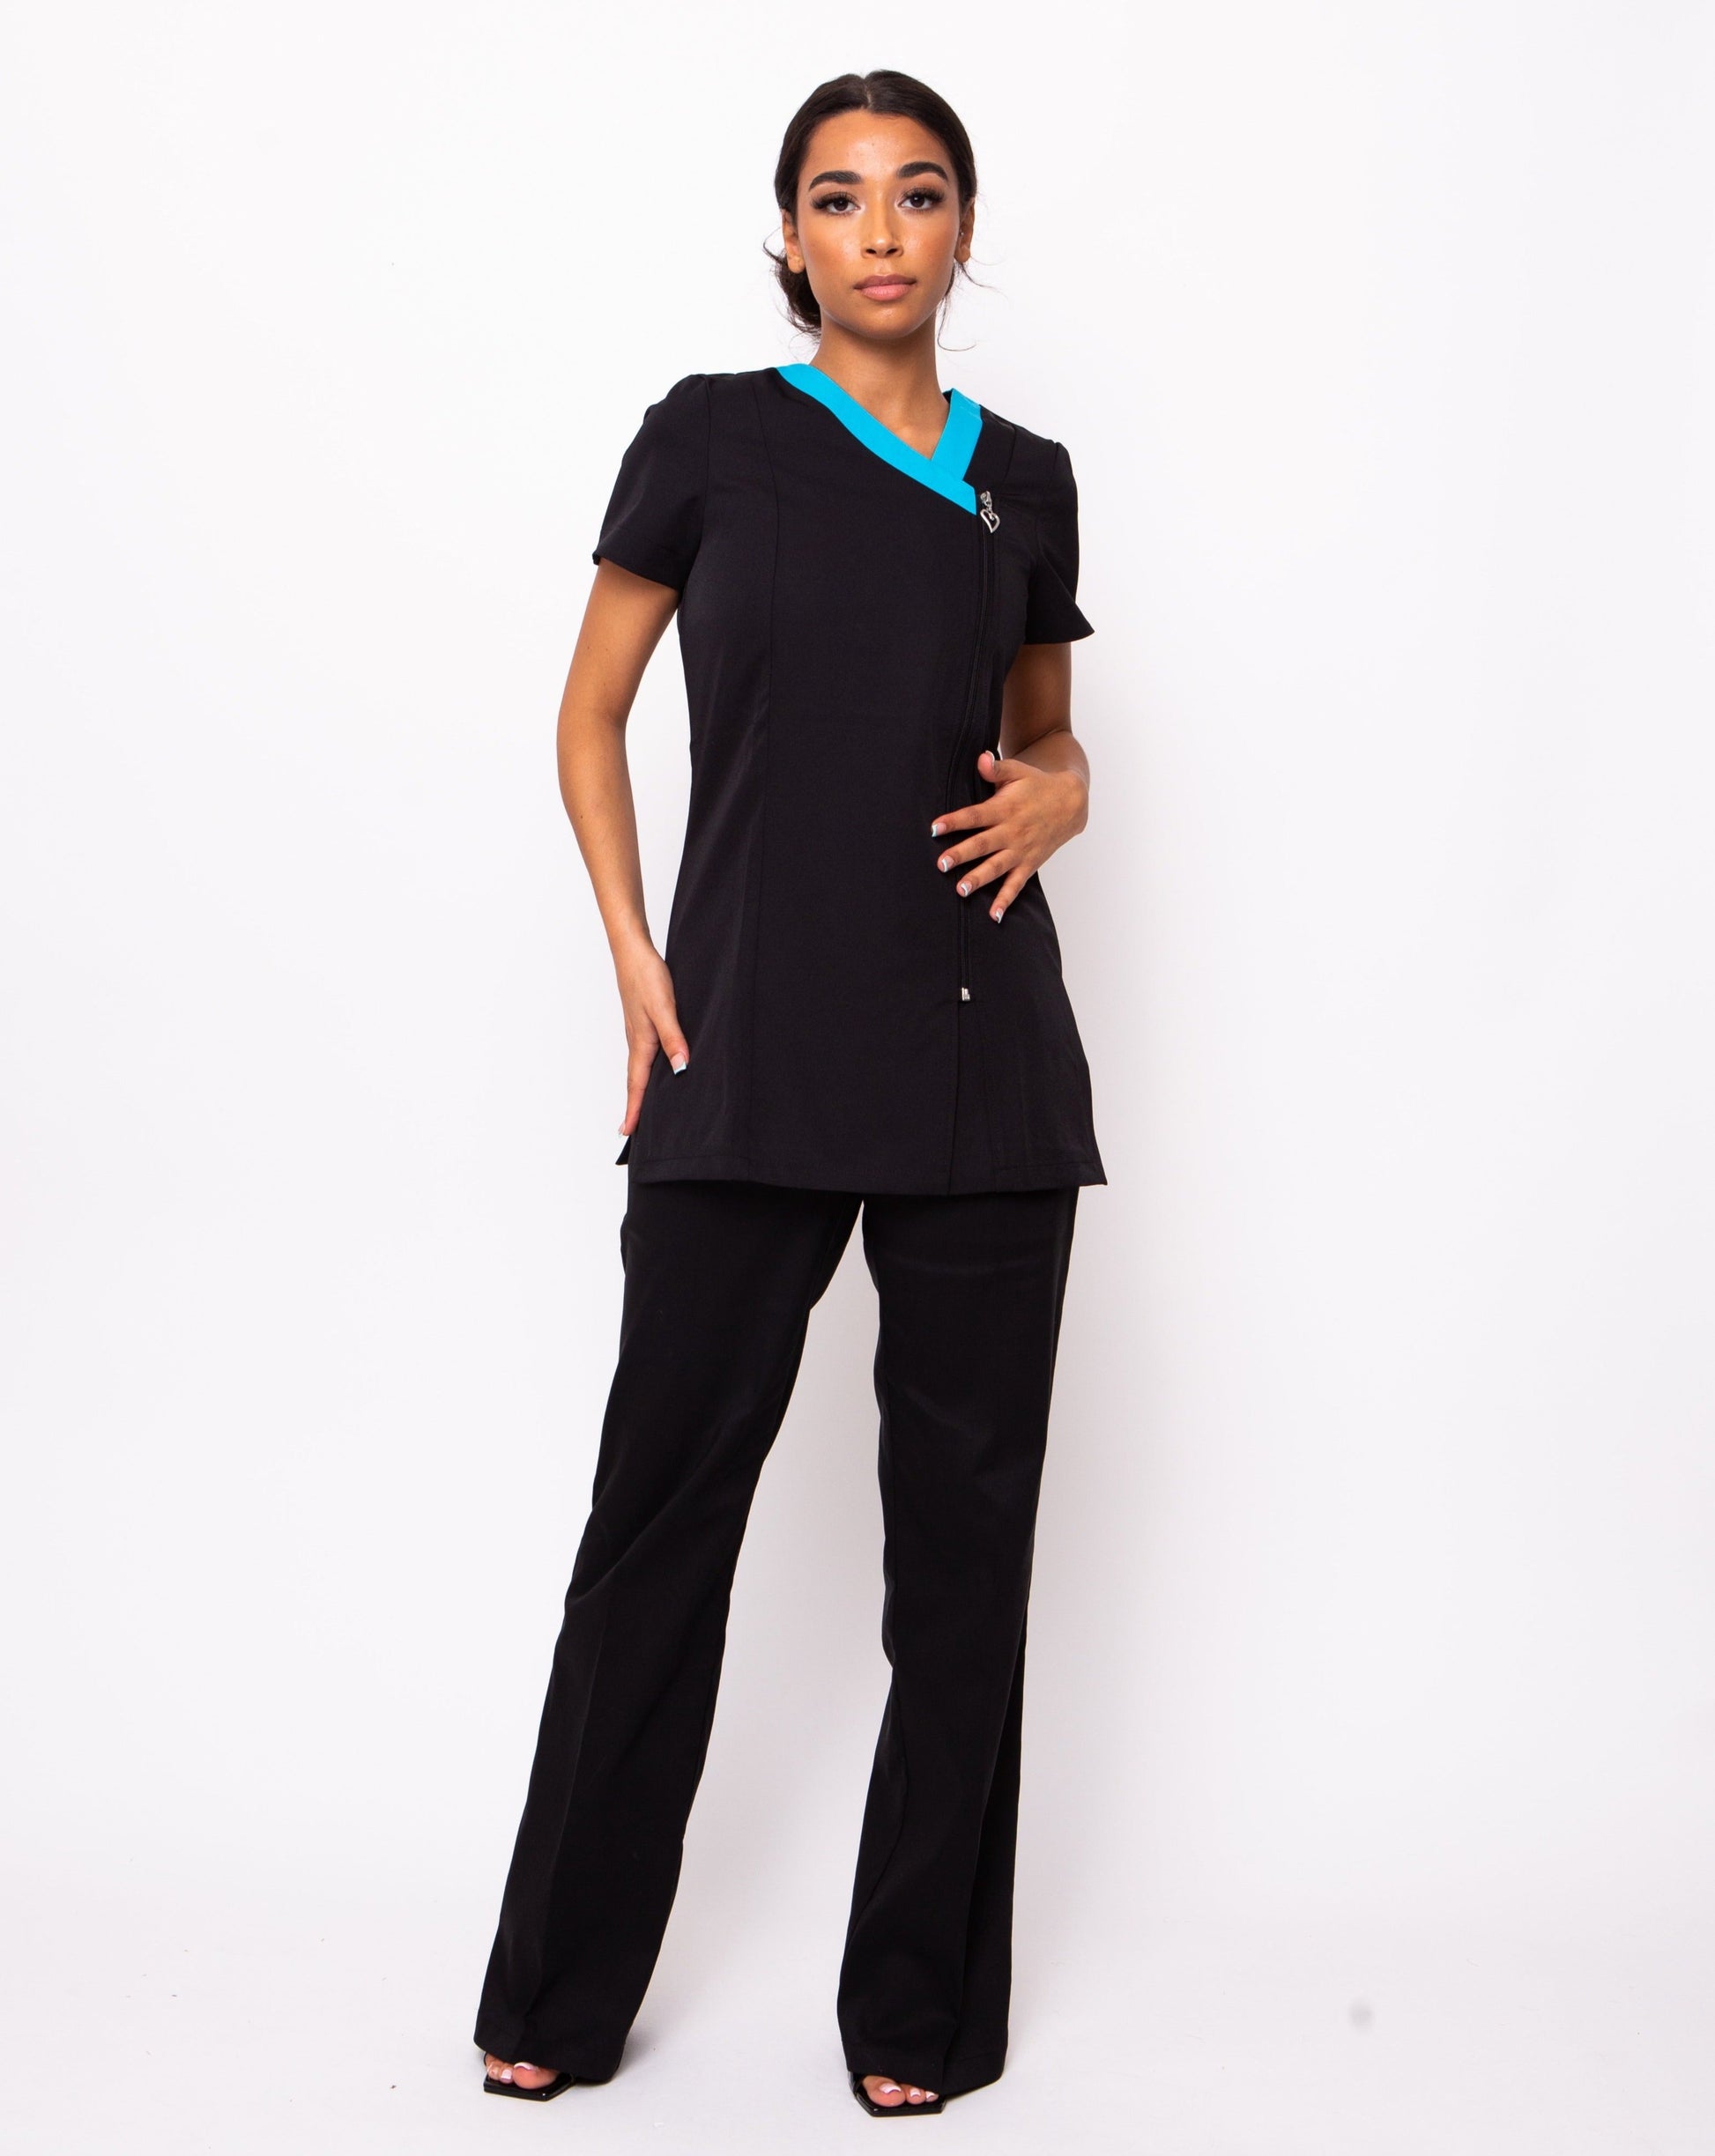 Black and teal beauty spa tunic and trouser